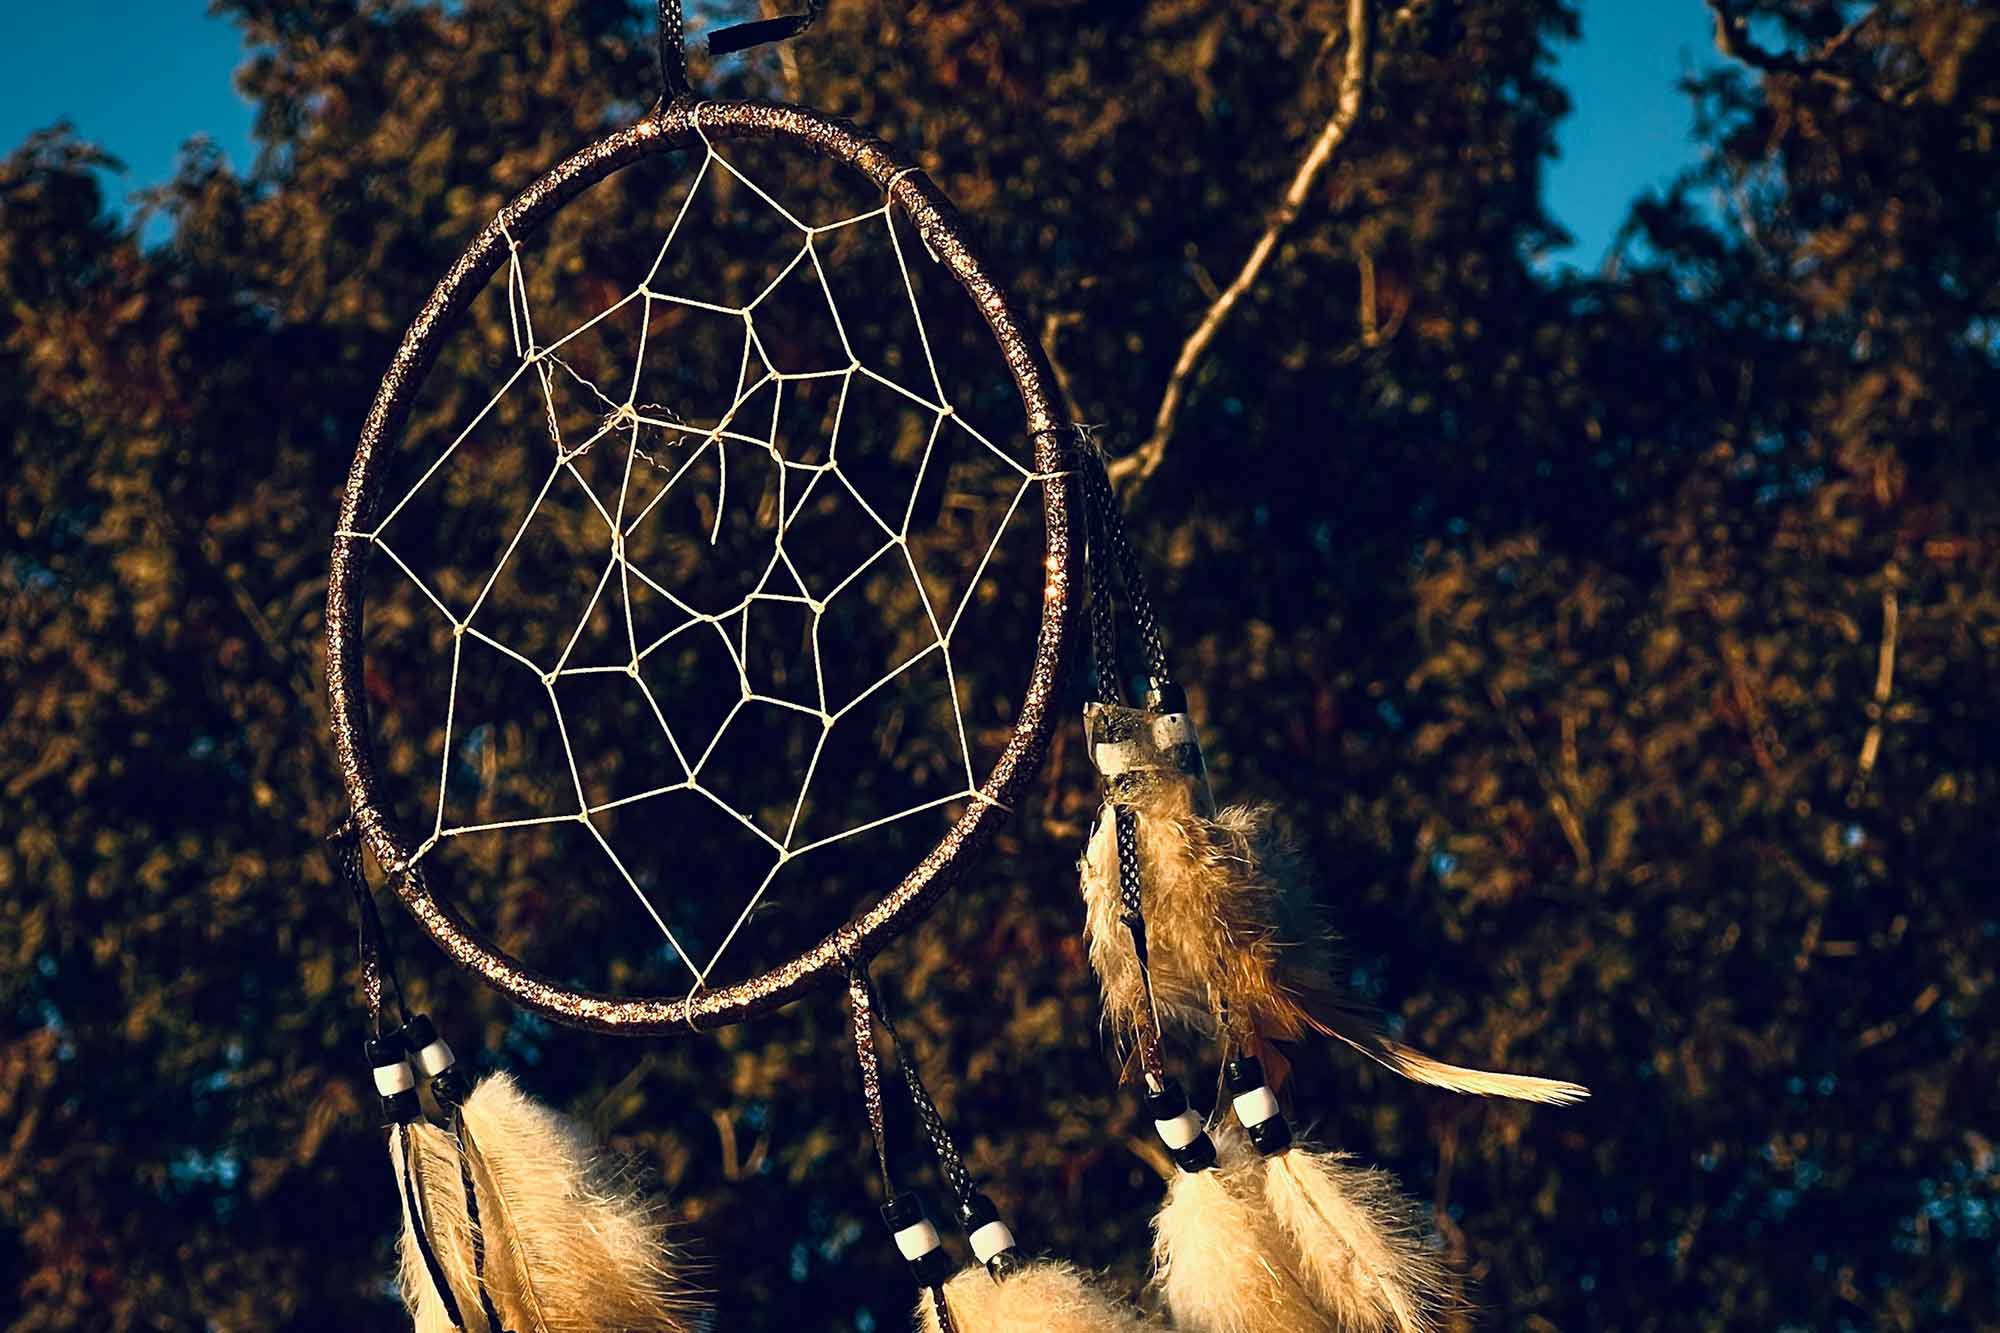 A dreamcatcher with feathers hung from a tree.